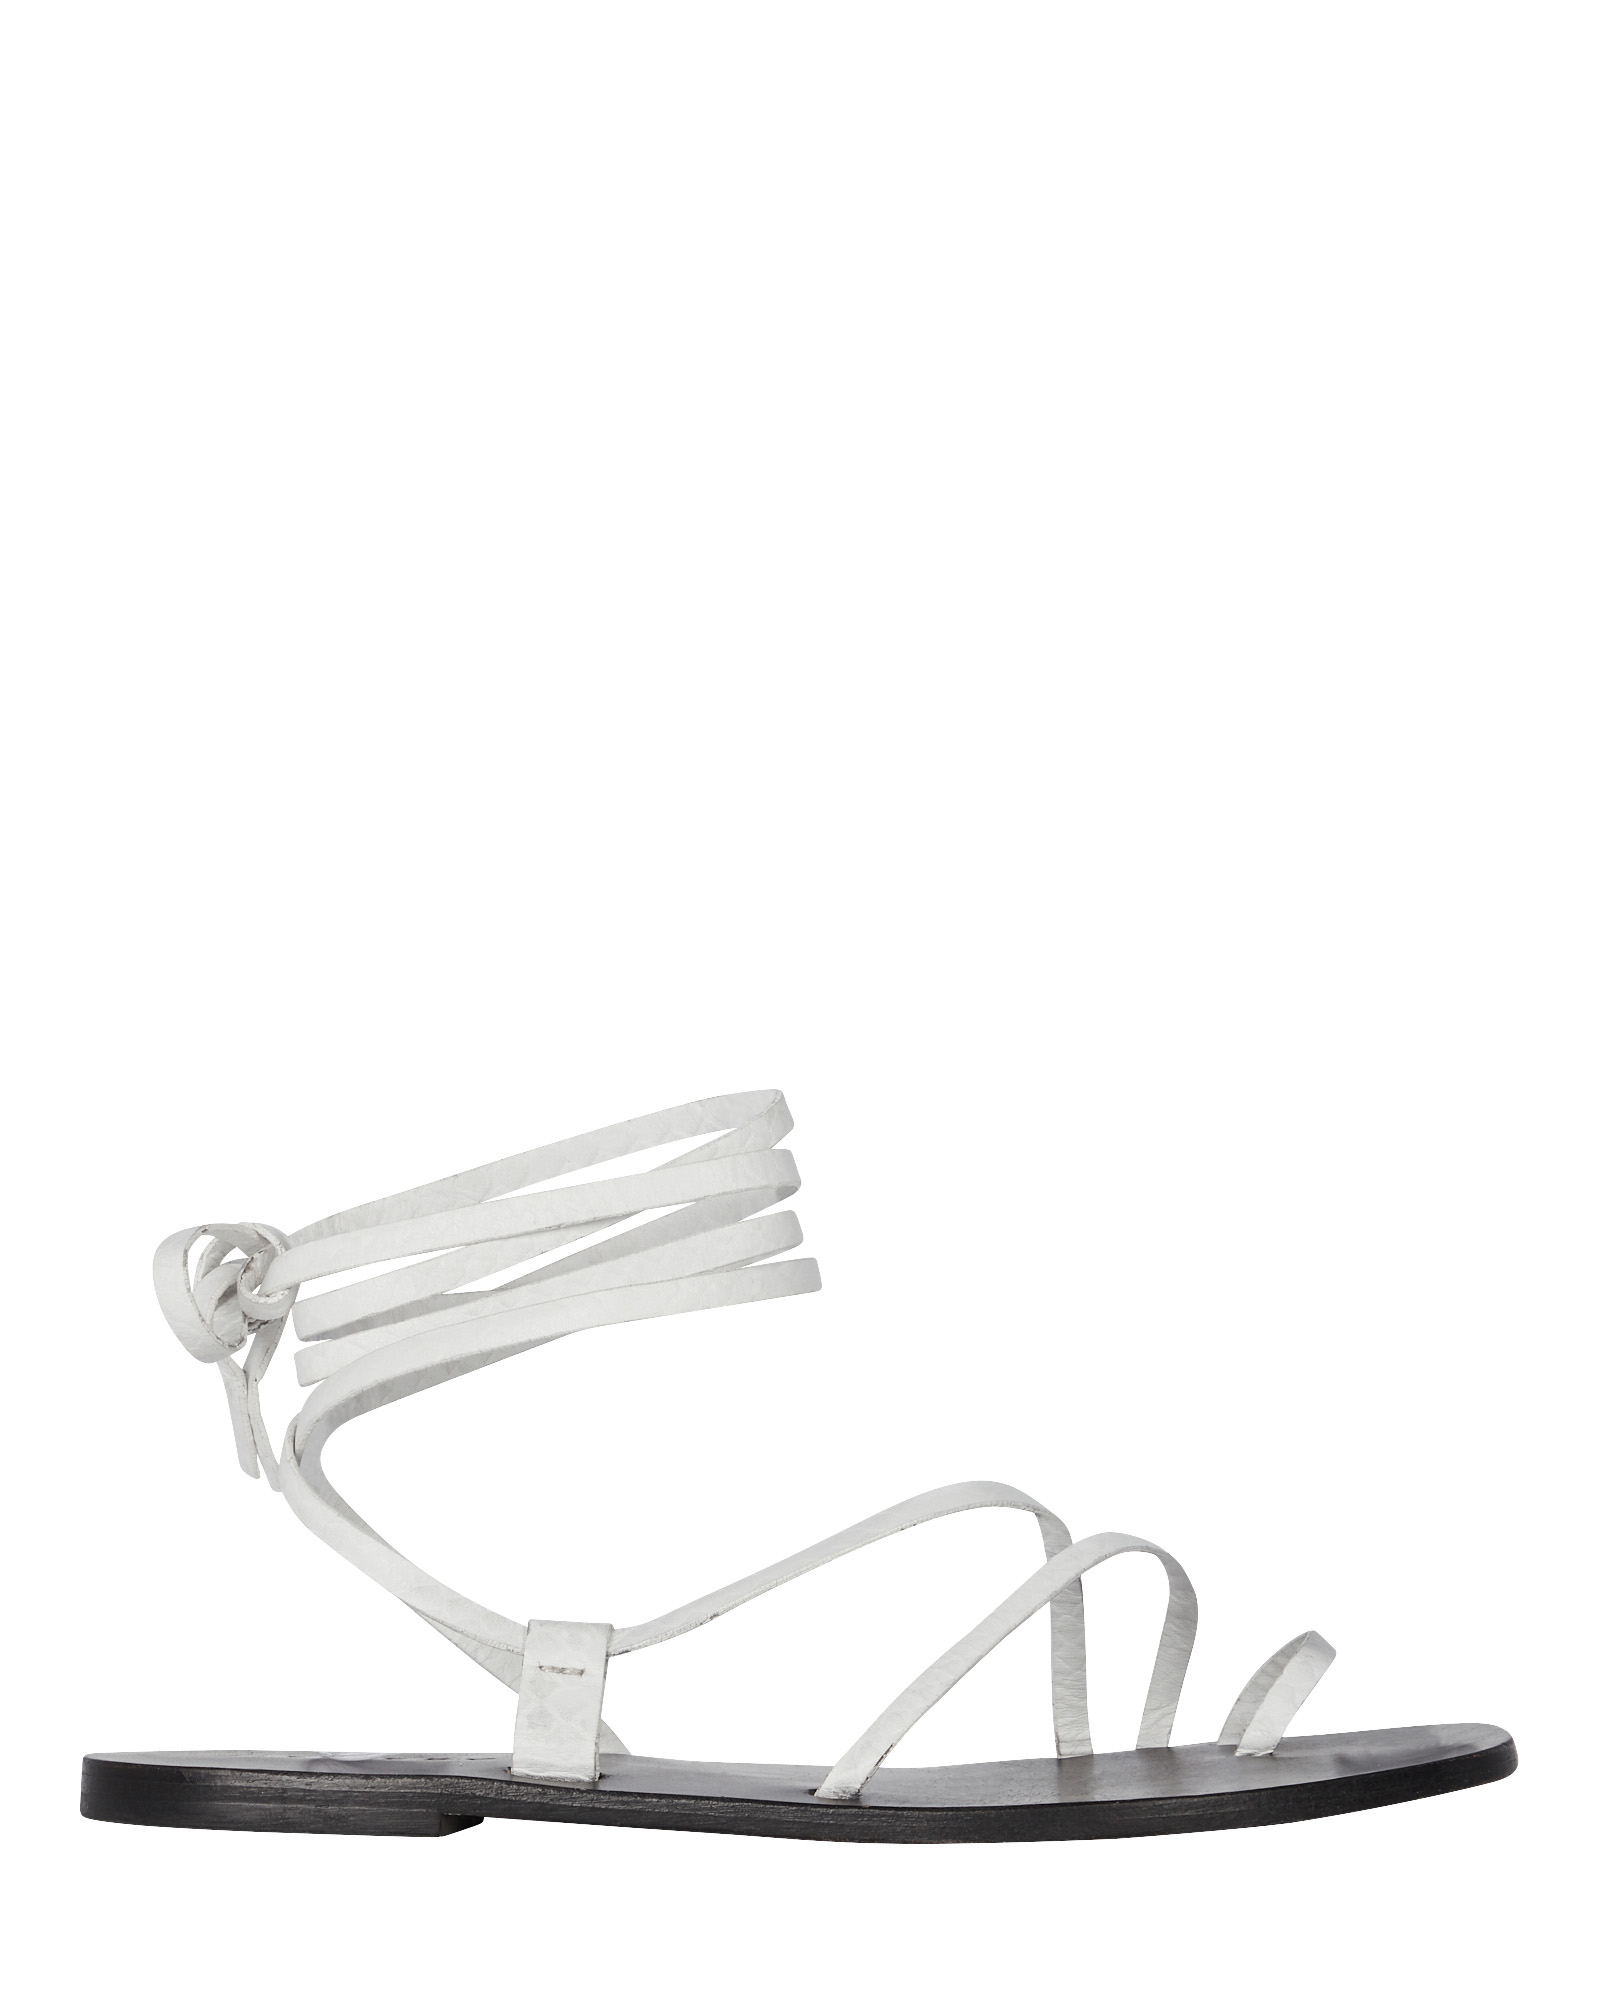 A.EMERY BEAU ANKLE TIE LEATHER SANDALS,060050756944